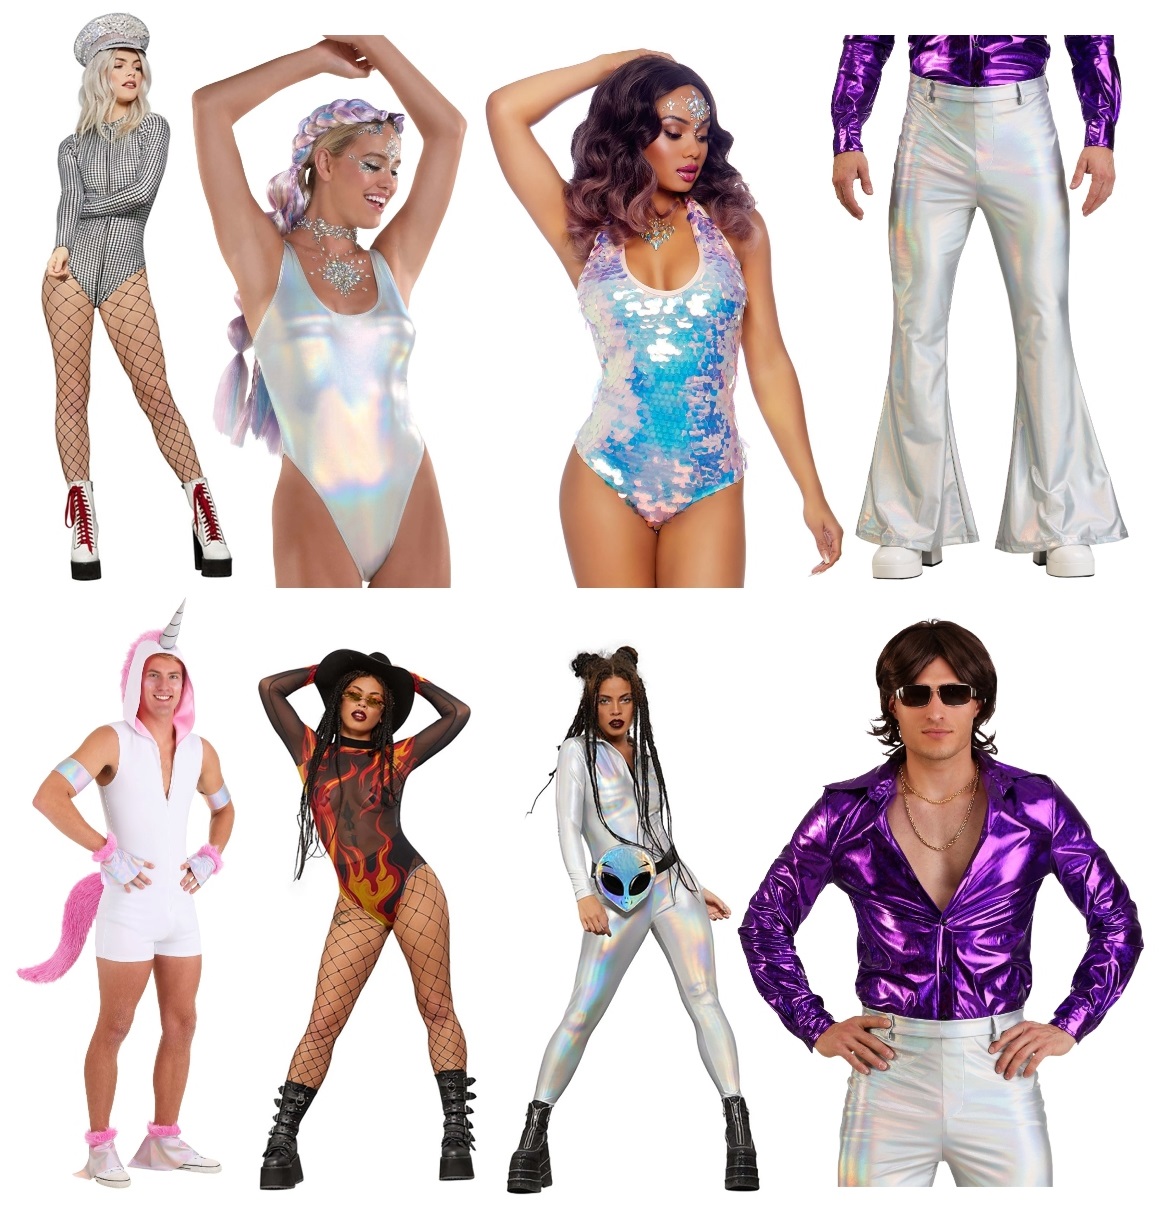 Pride Outfits